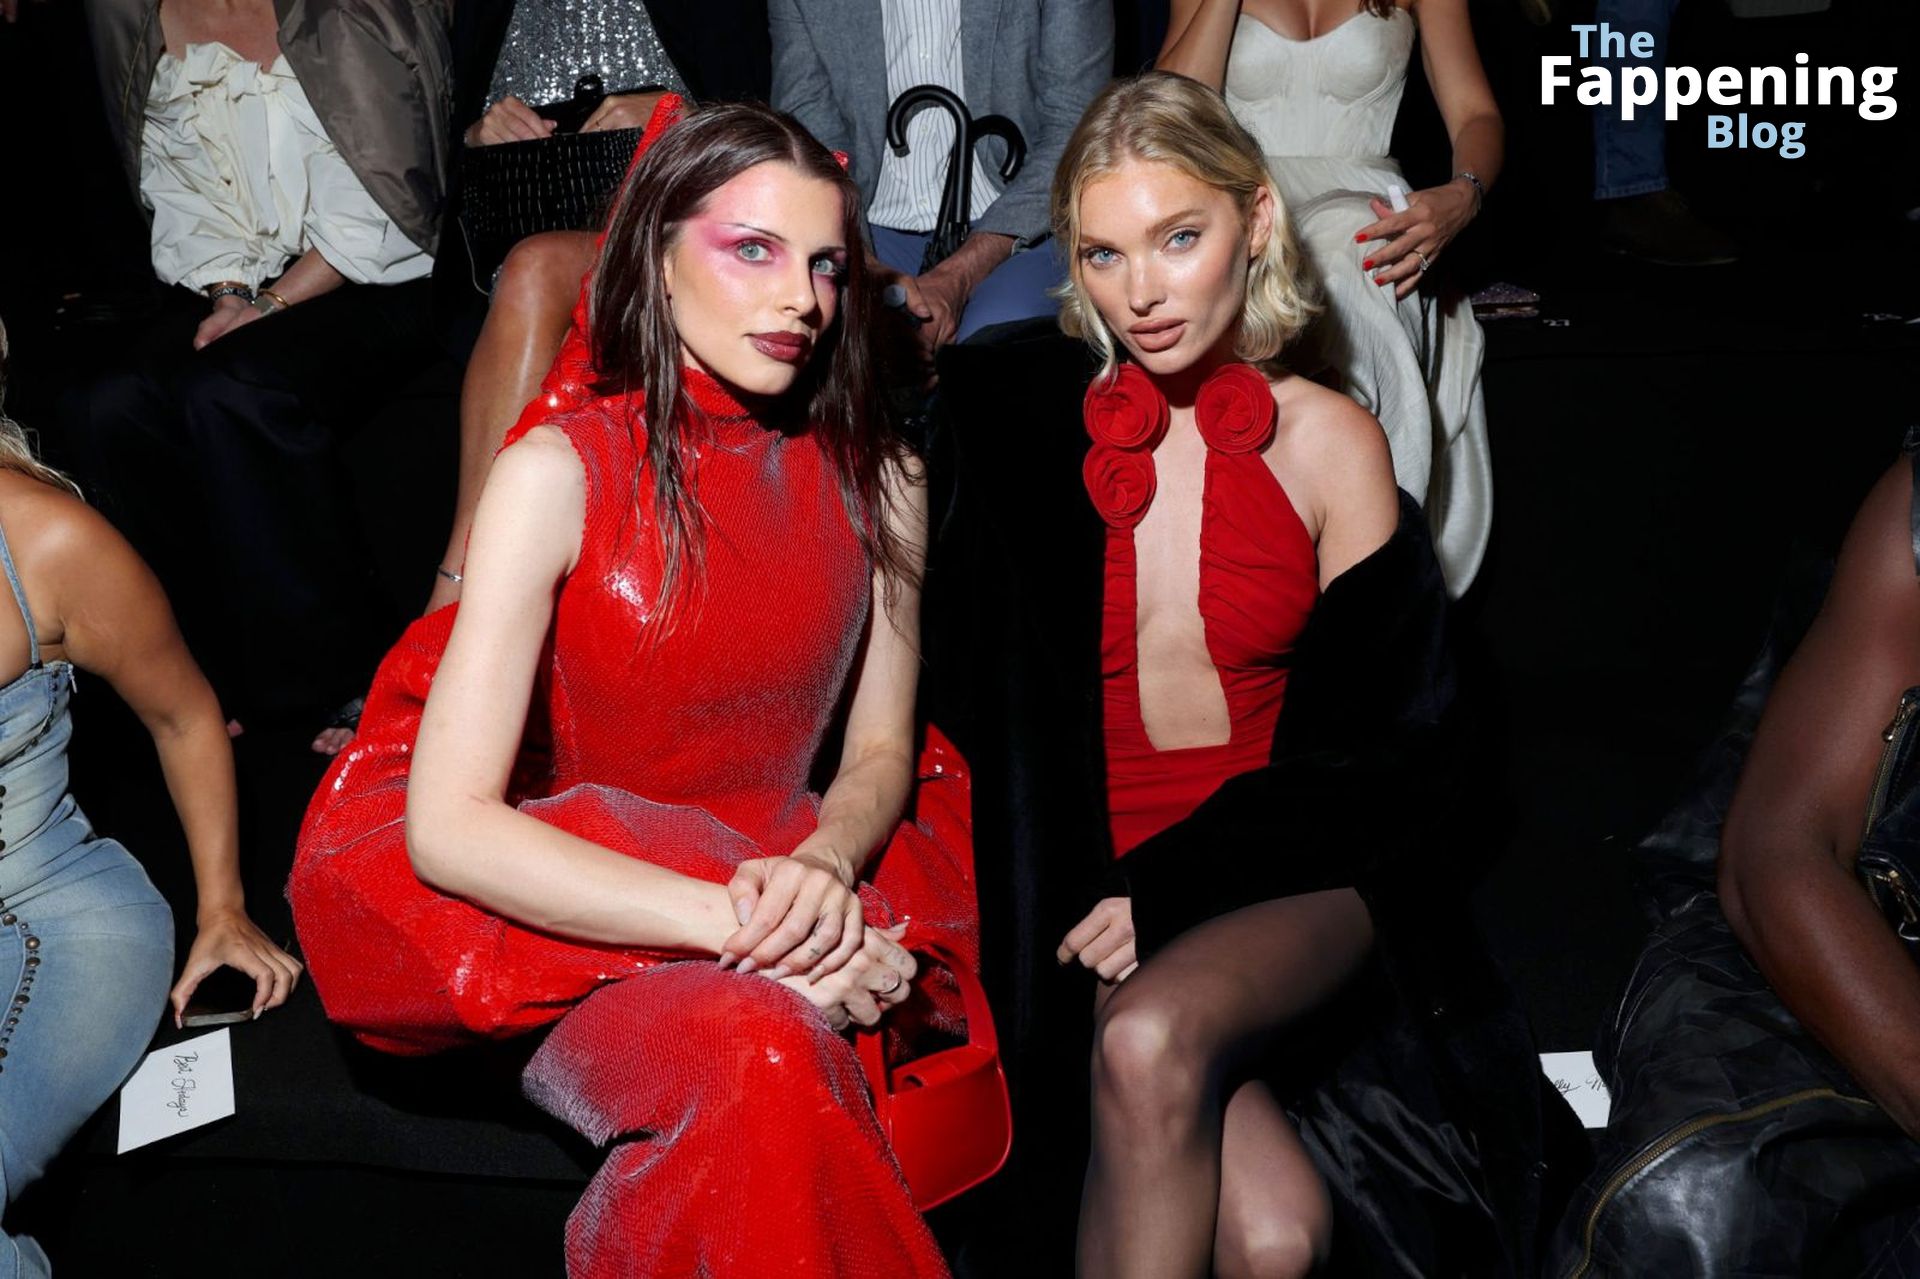 Elsa Hosk Displays Her Slender Figure in a Red Dress at the Fashion Show (38 Photos)